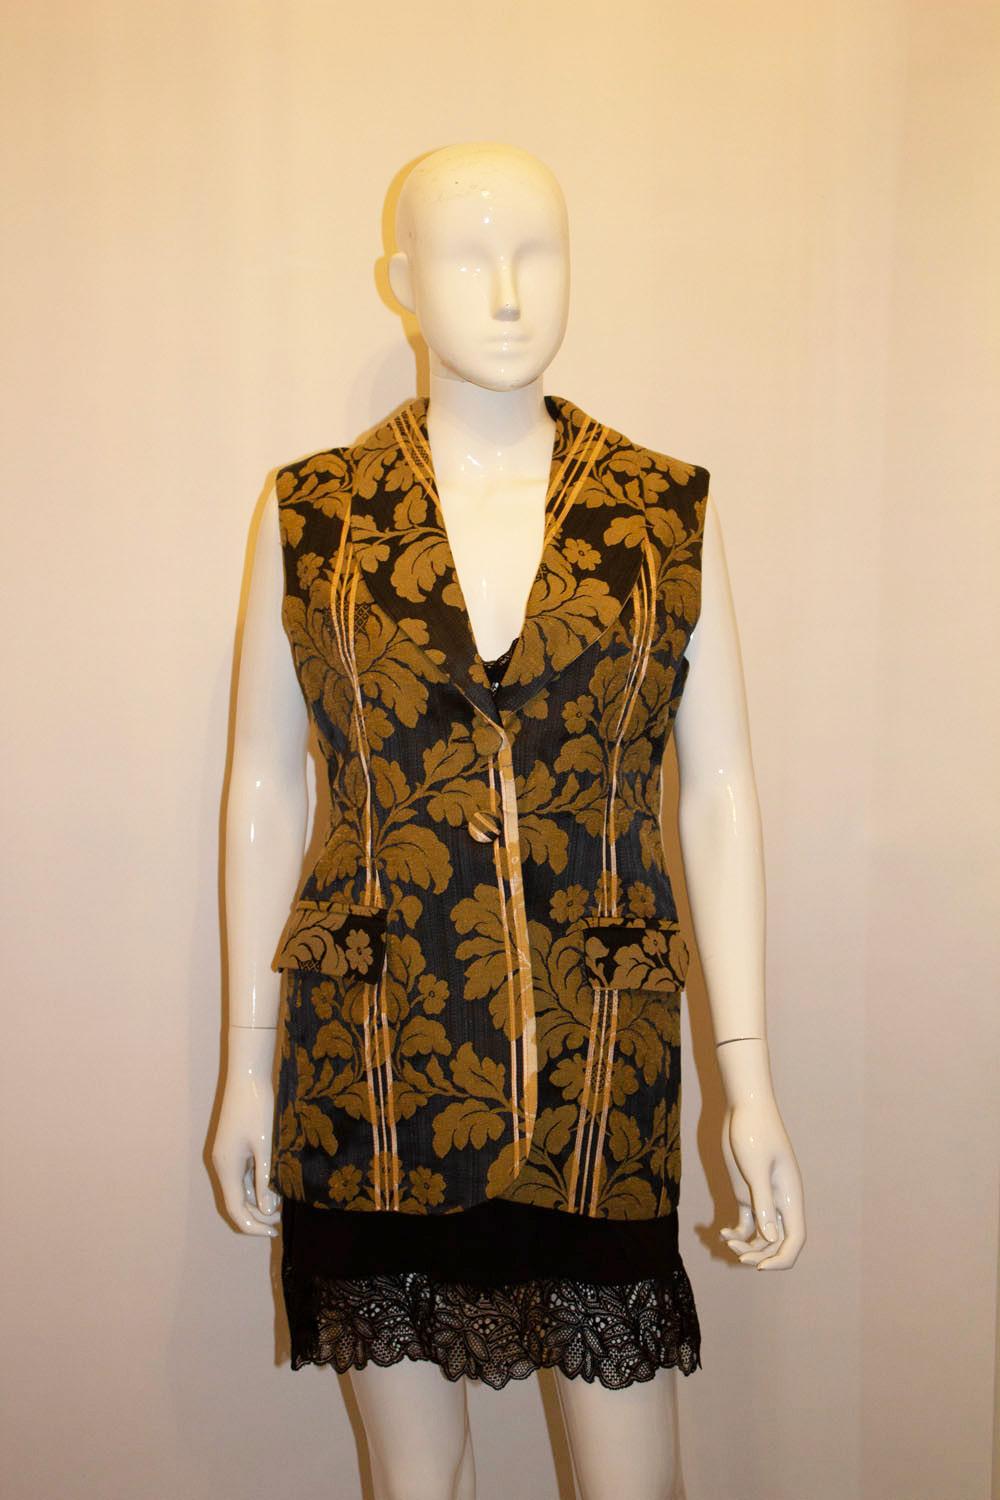 Women's or Men's Liberty of London Black and Gold Waistcoat. For Sale